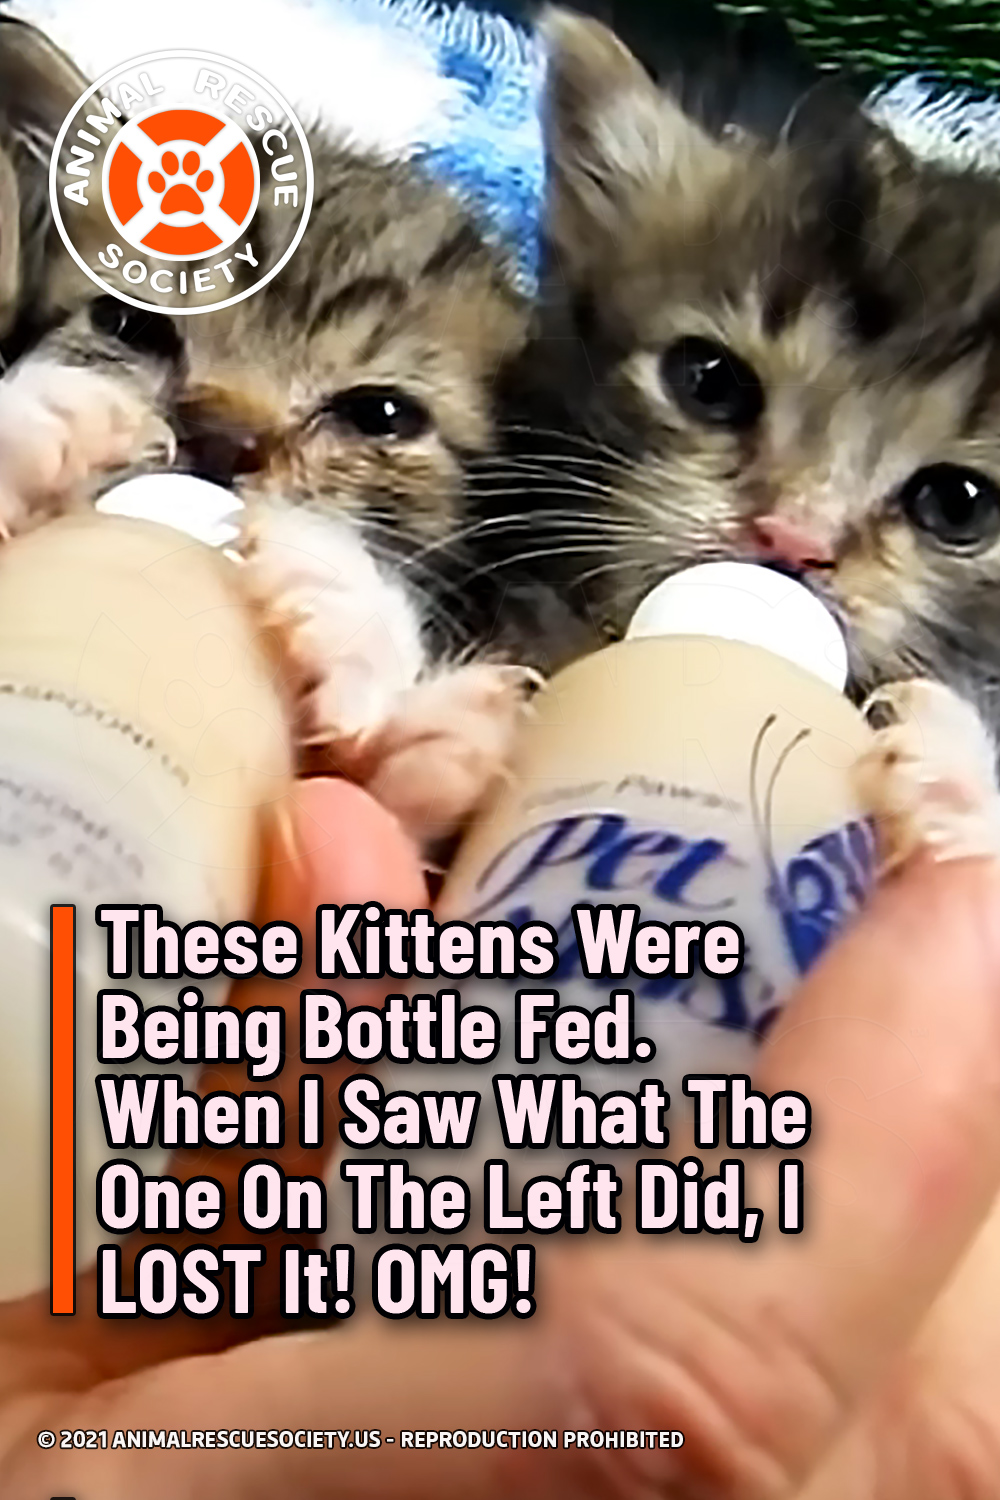 These Kittens Were Being Bottle Fed. When I Saw What The One On The Left Did, I LOST It! OMG!